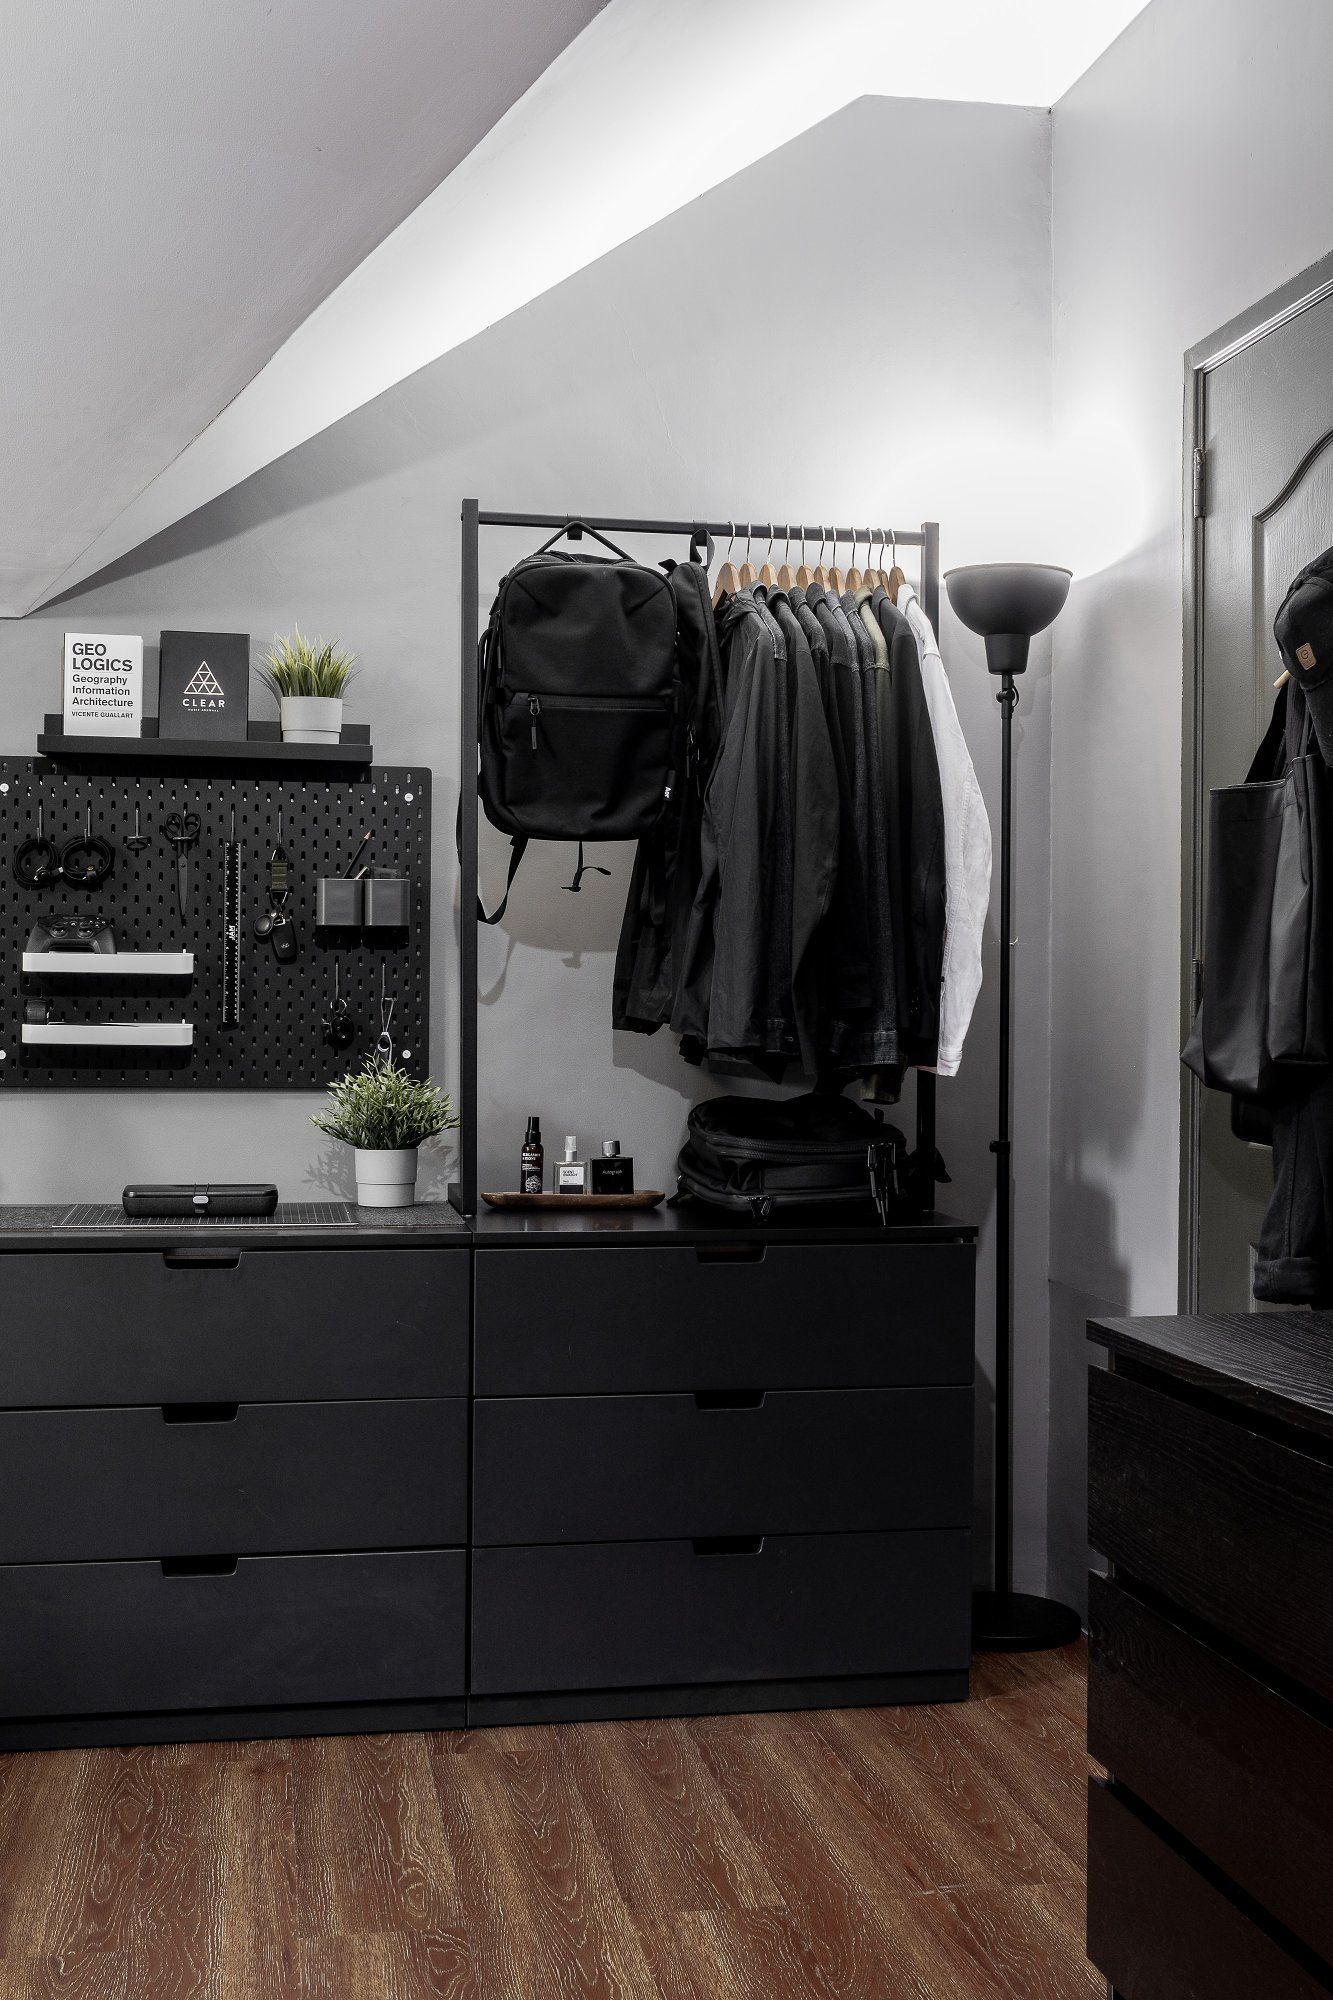 The minimal, neatly-organised home workspace with rails to hang clothes and a backpack, as well as a metal pegboard on the wall